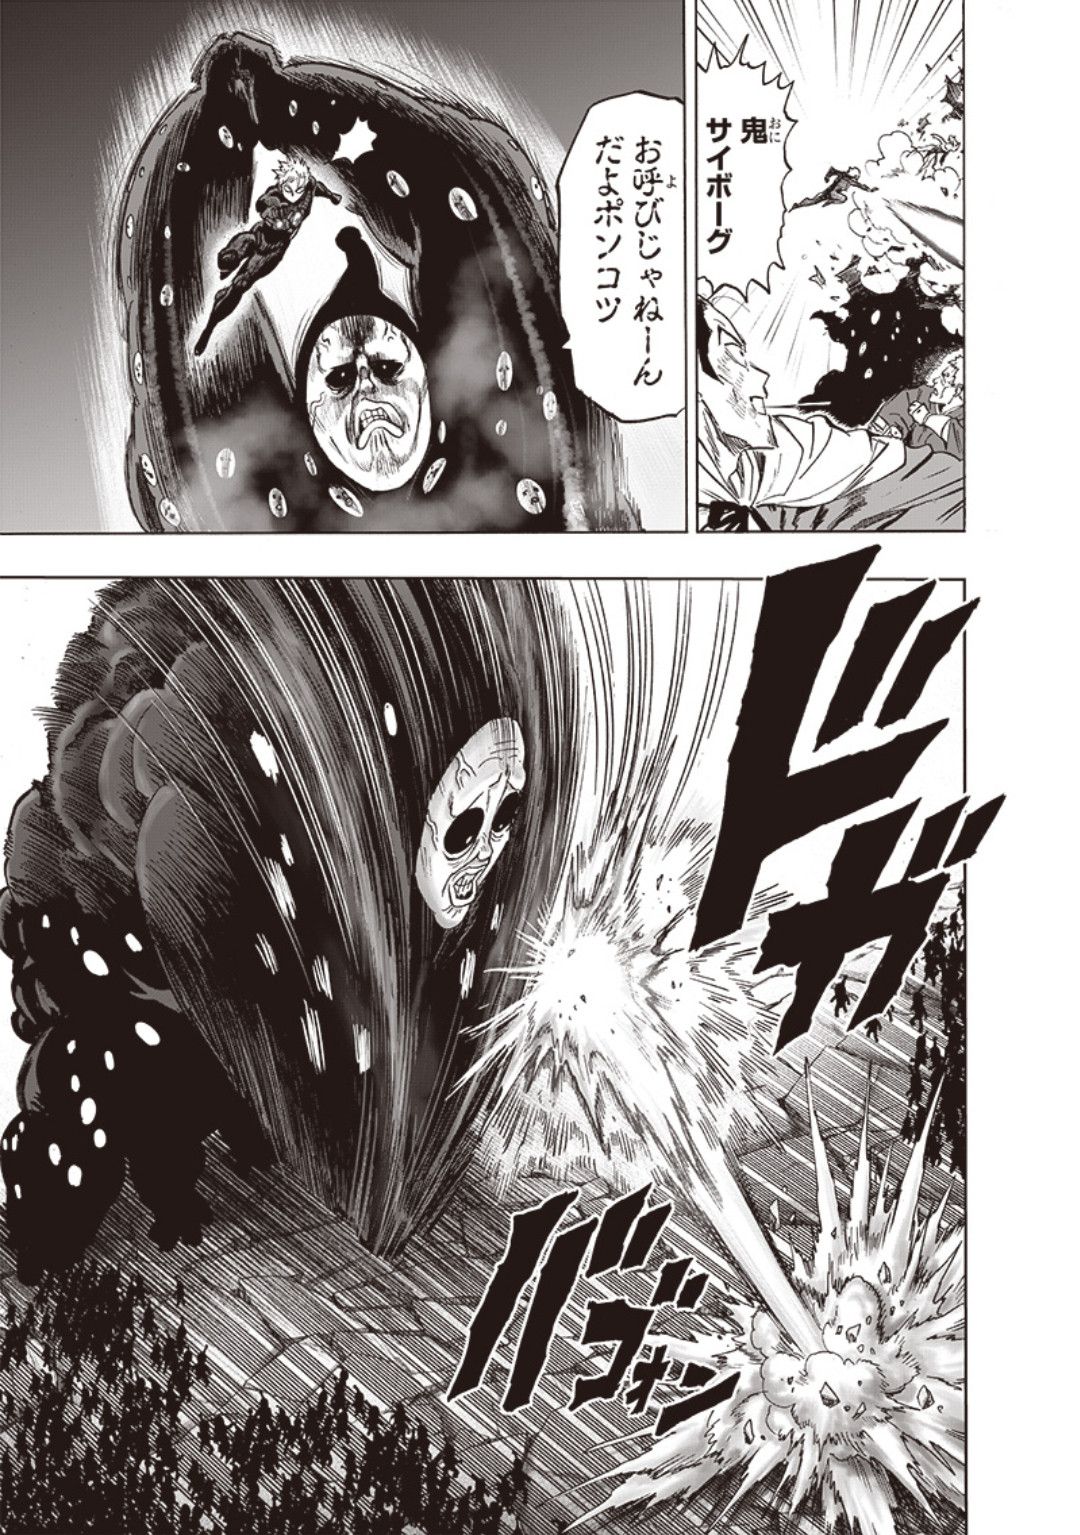 【Image】One Punch Man's latest episode, Tamatsuki's are rubbed by Saitama 5